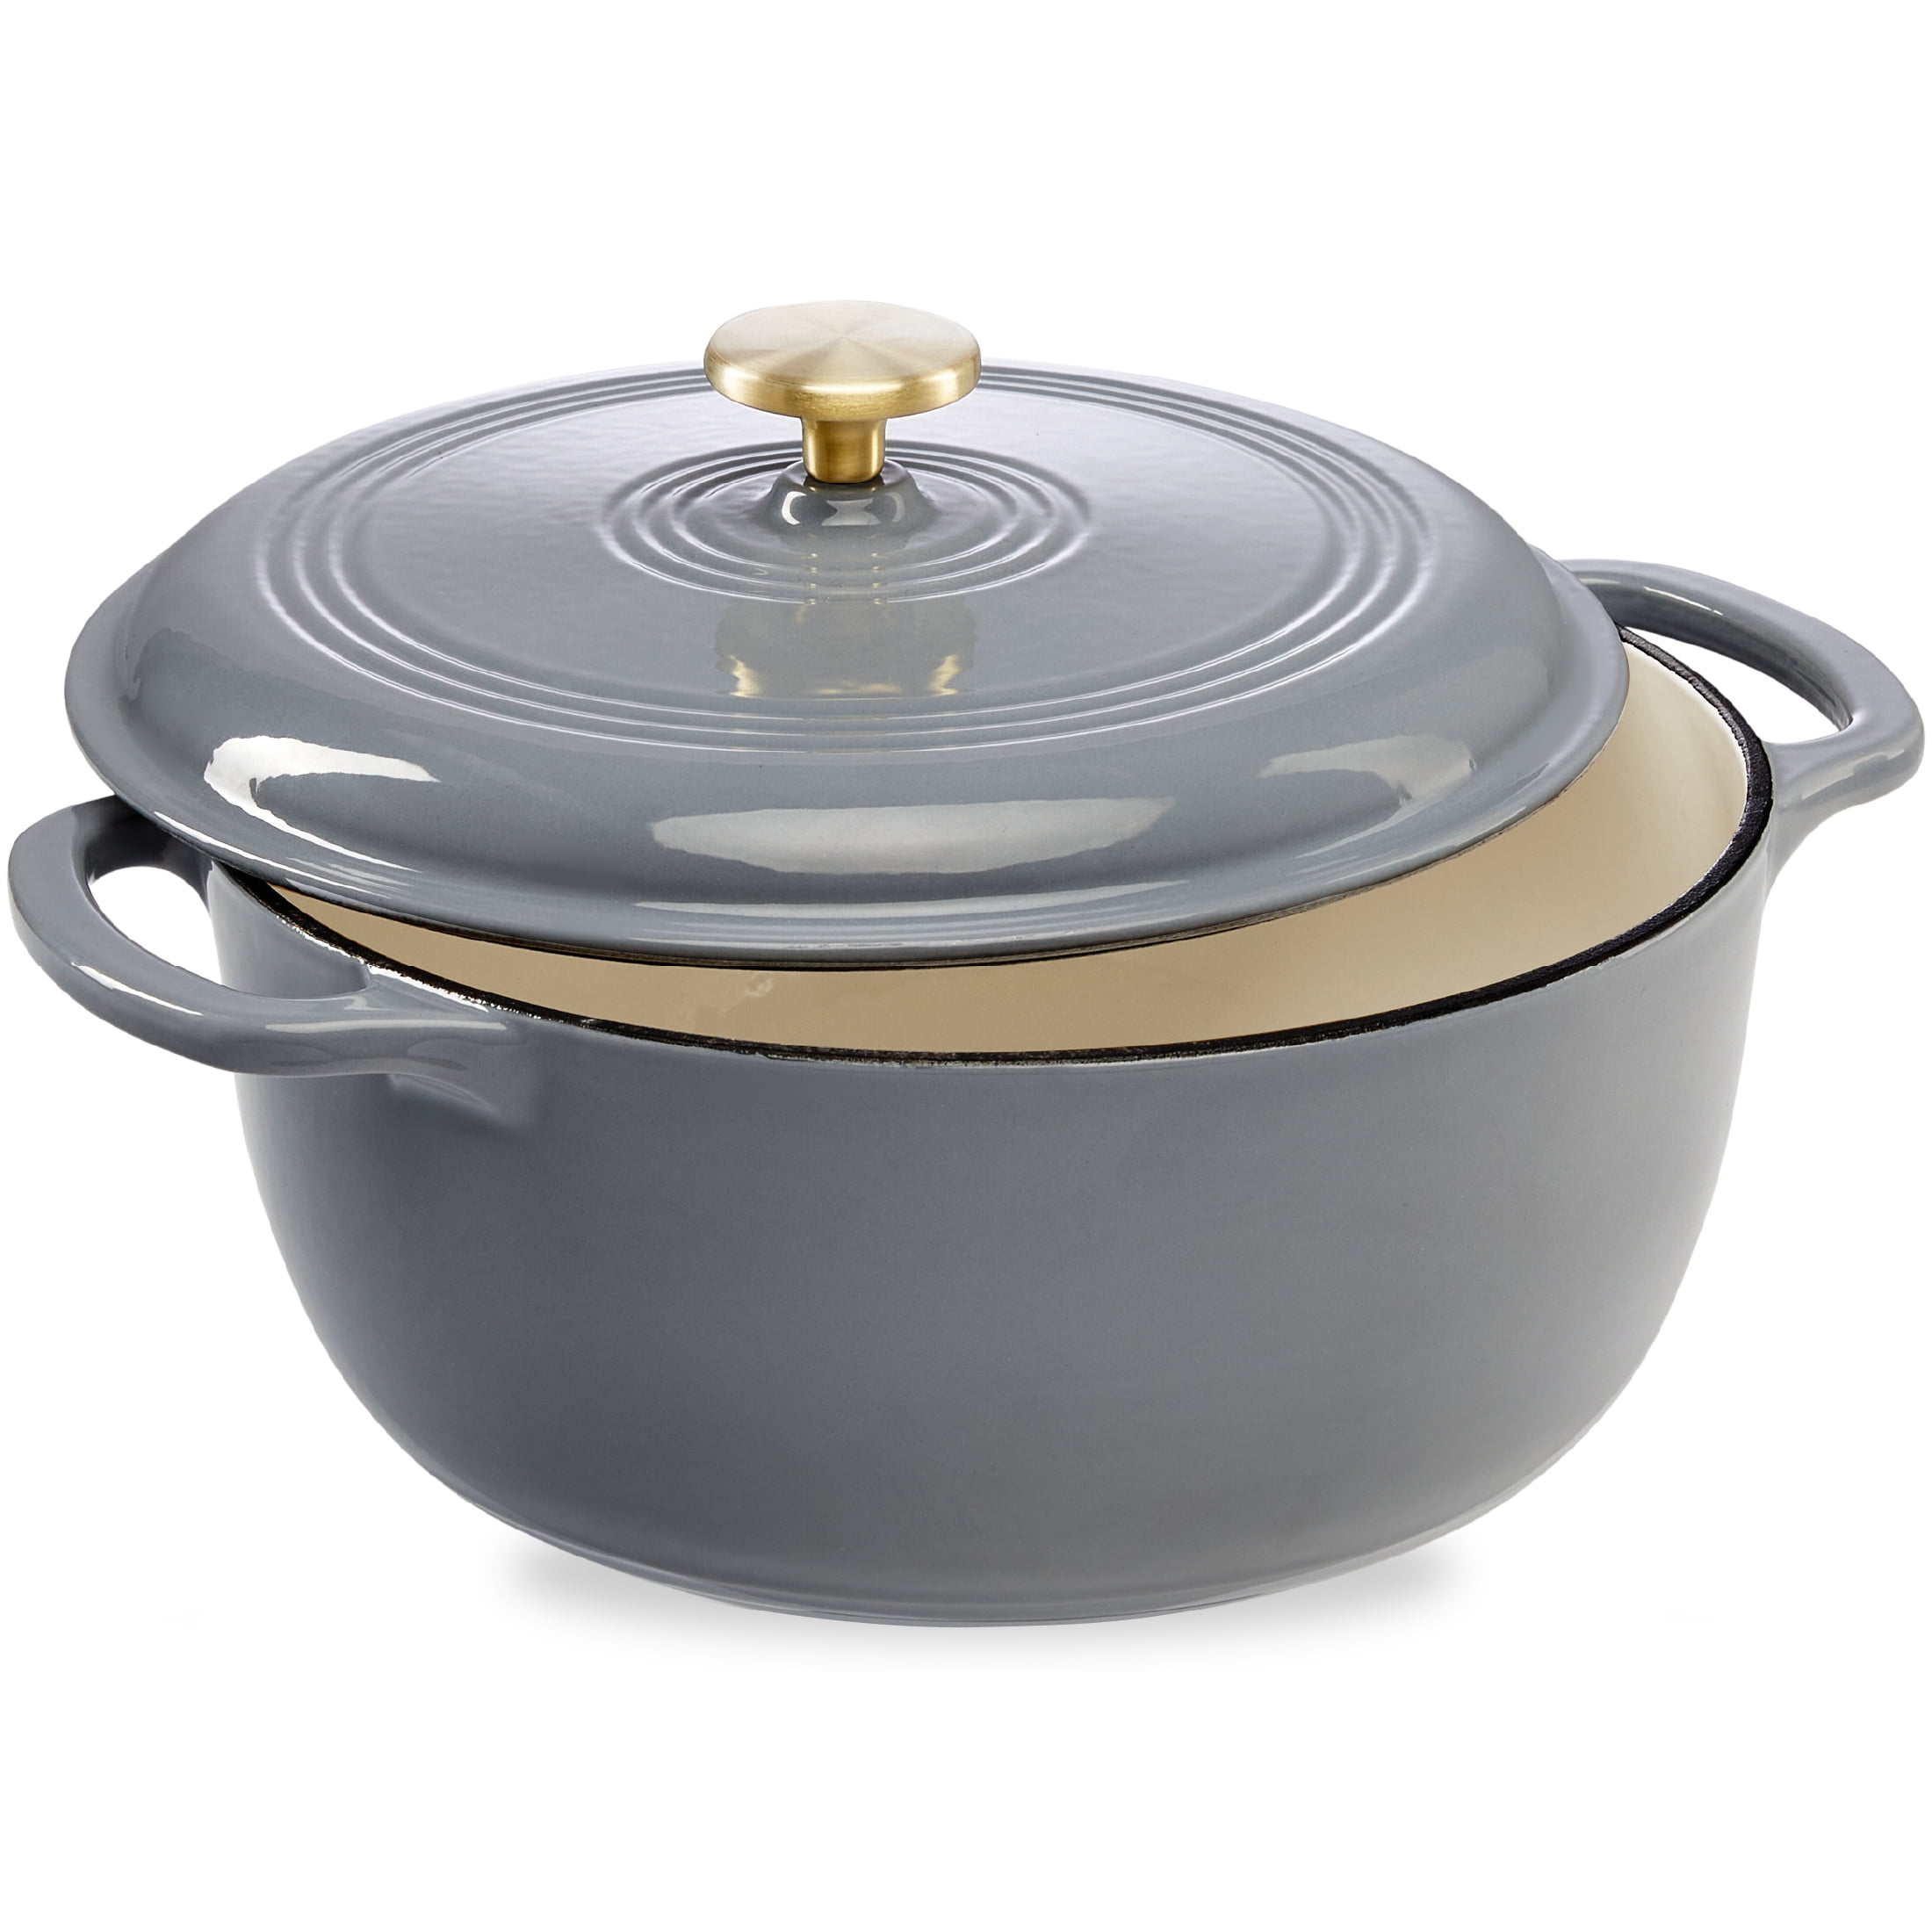 Cast Iron Double Dutch Oven - general for sale - by owner - craigslist